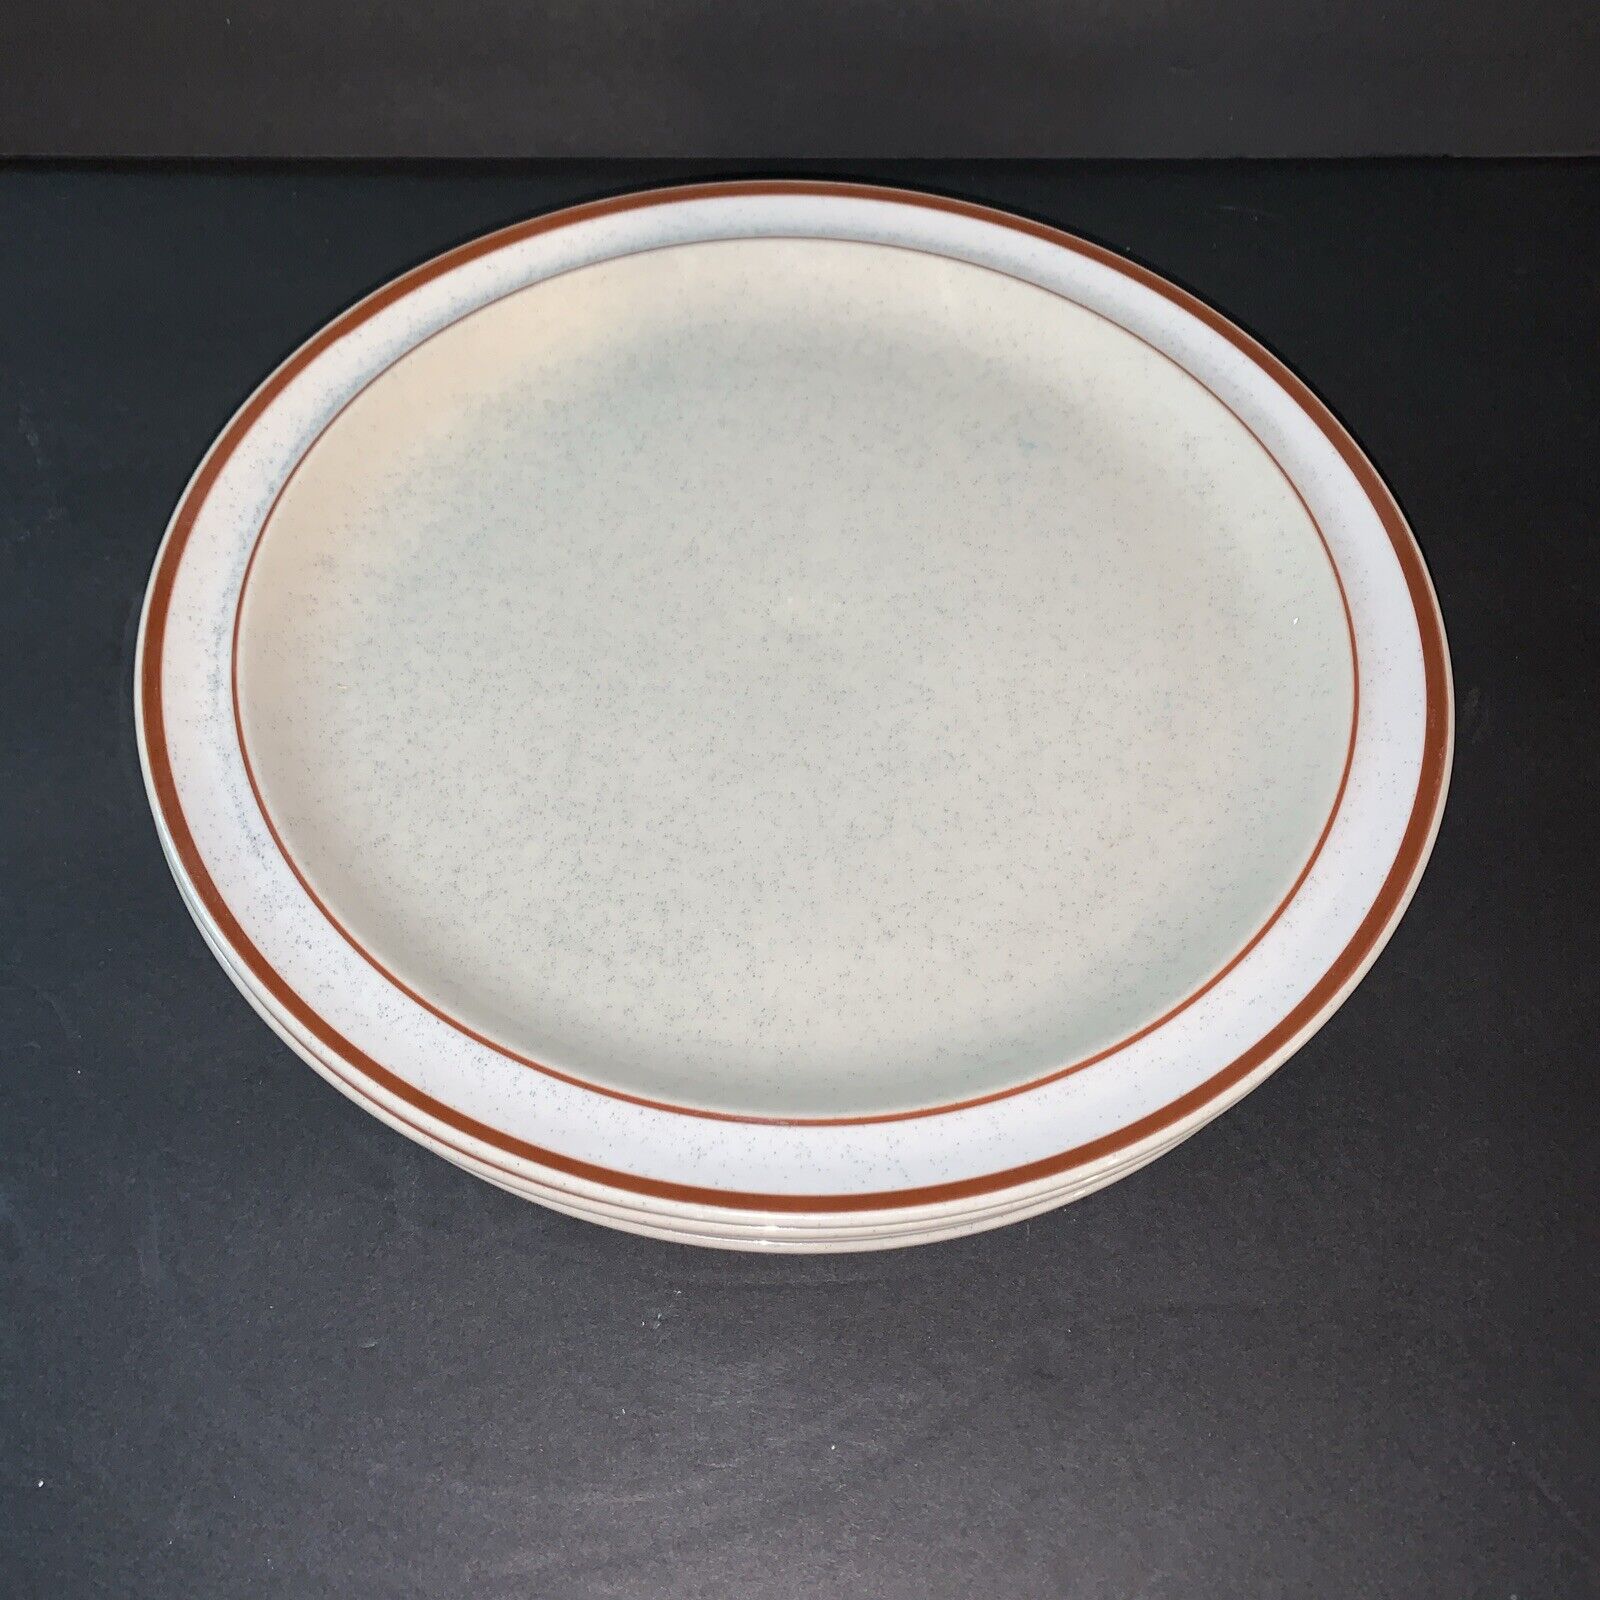 Norwell Stoneware “OSLO” Oven To Table Dinner Plates RARE Set Of 4